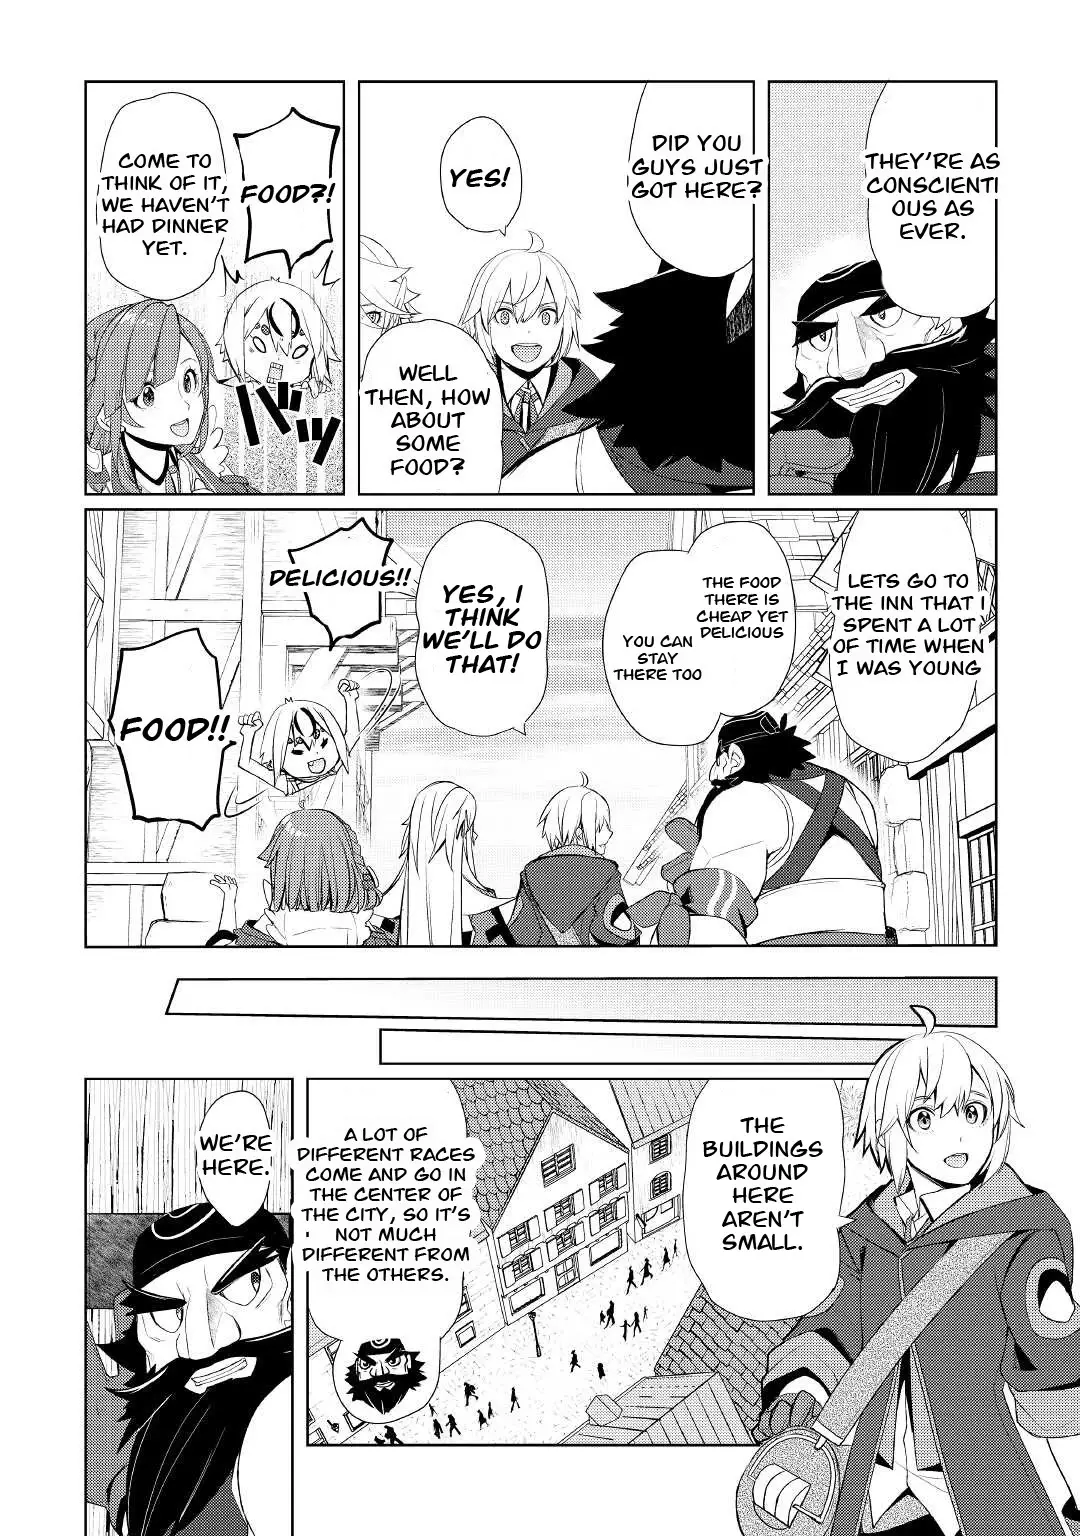 Someday Will I Be The Greatest Alchemist? - 31 page 8-4a638cf4